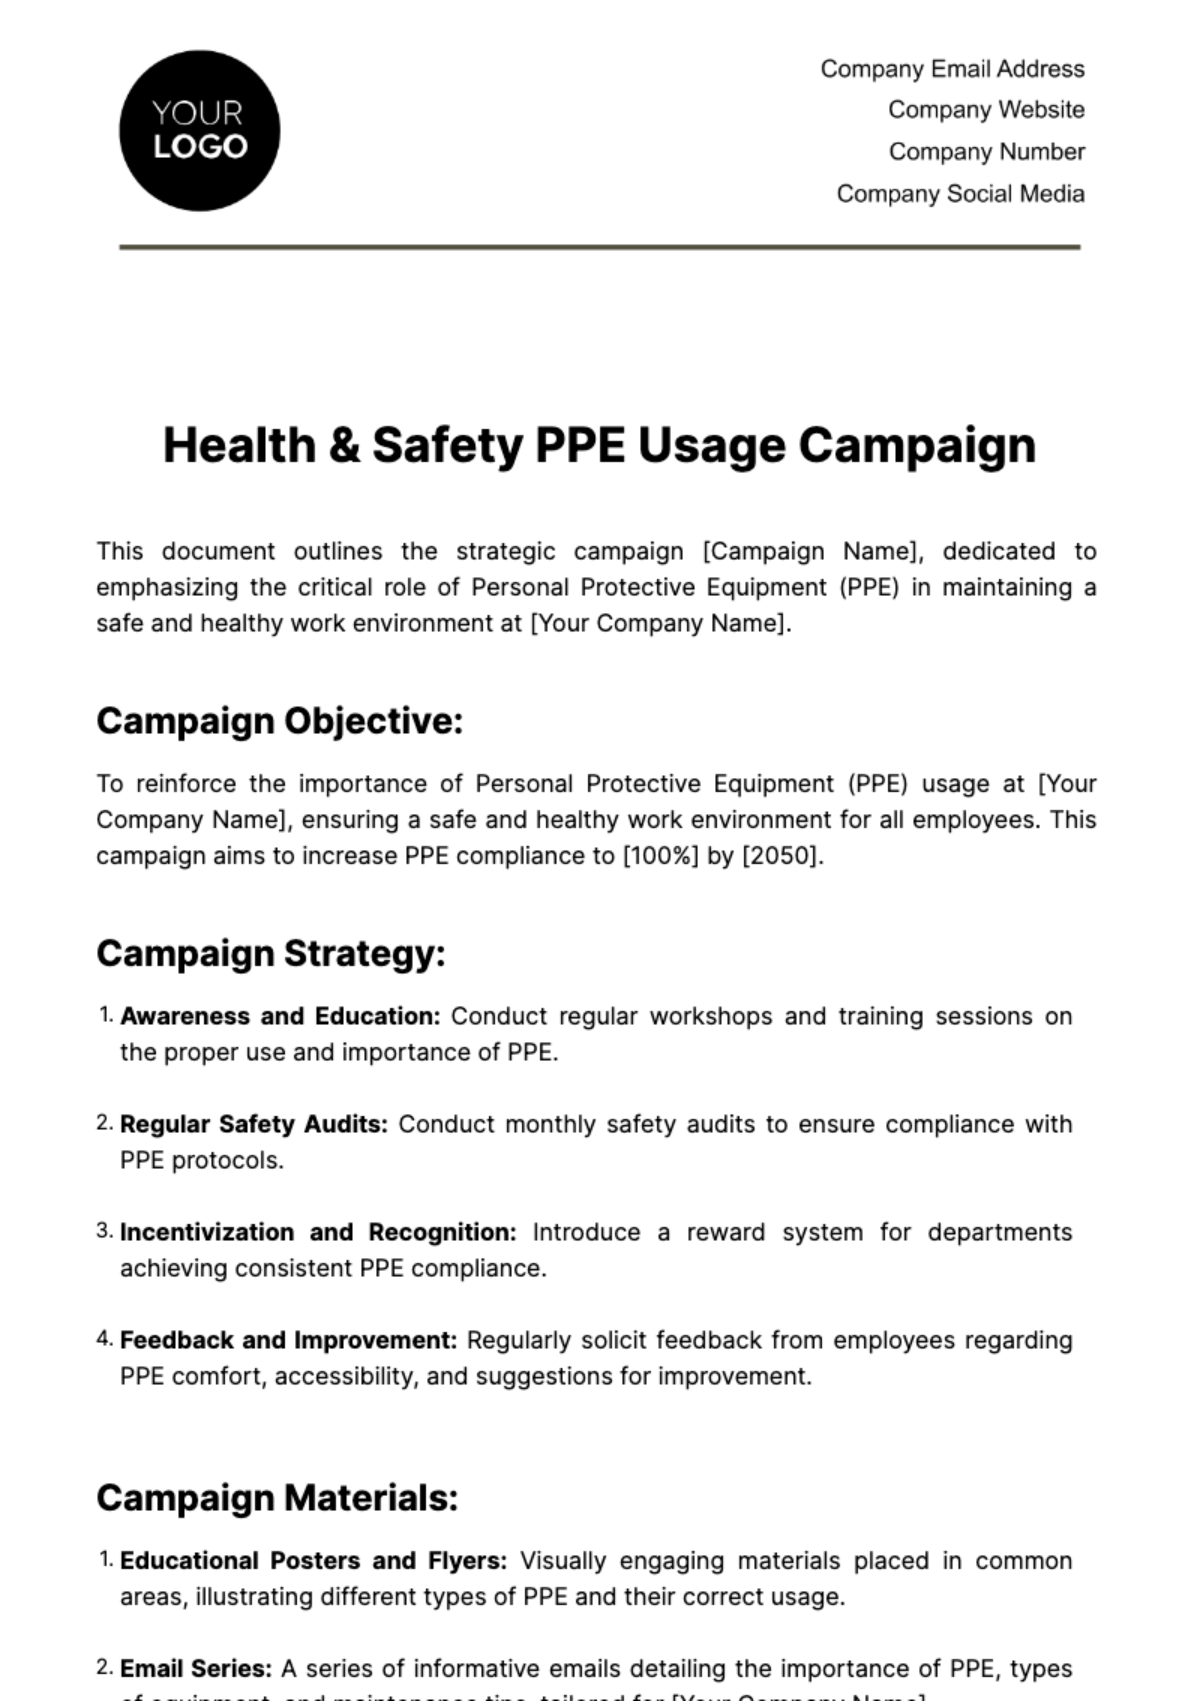 Free Health & Safety PPE Usage Campaign Template